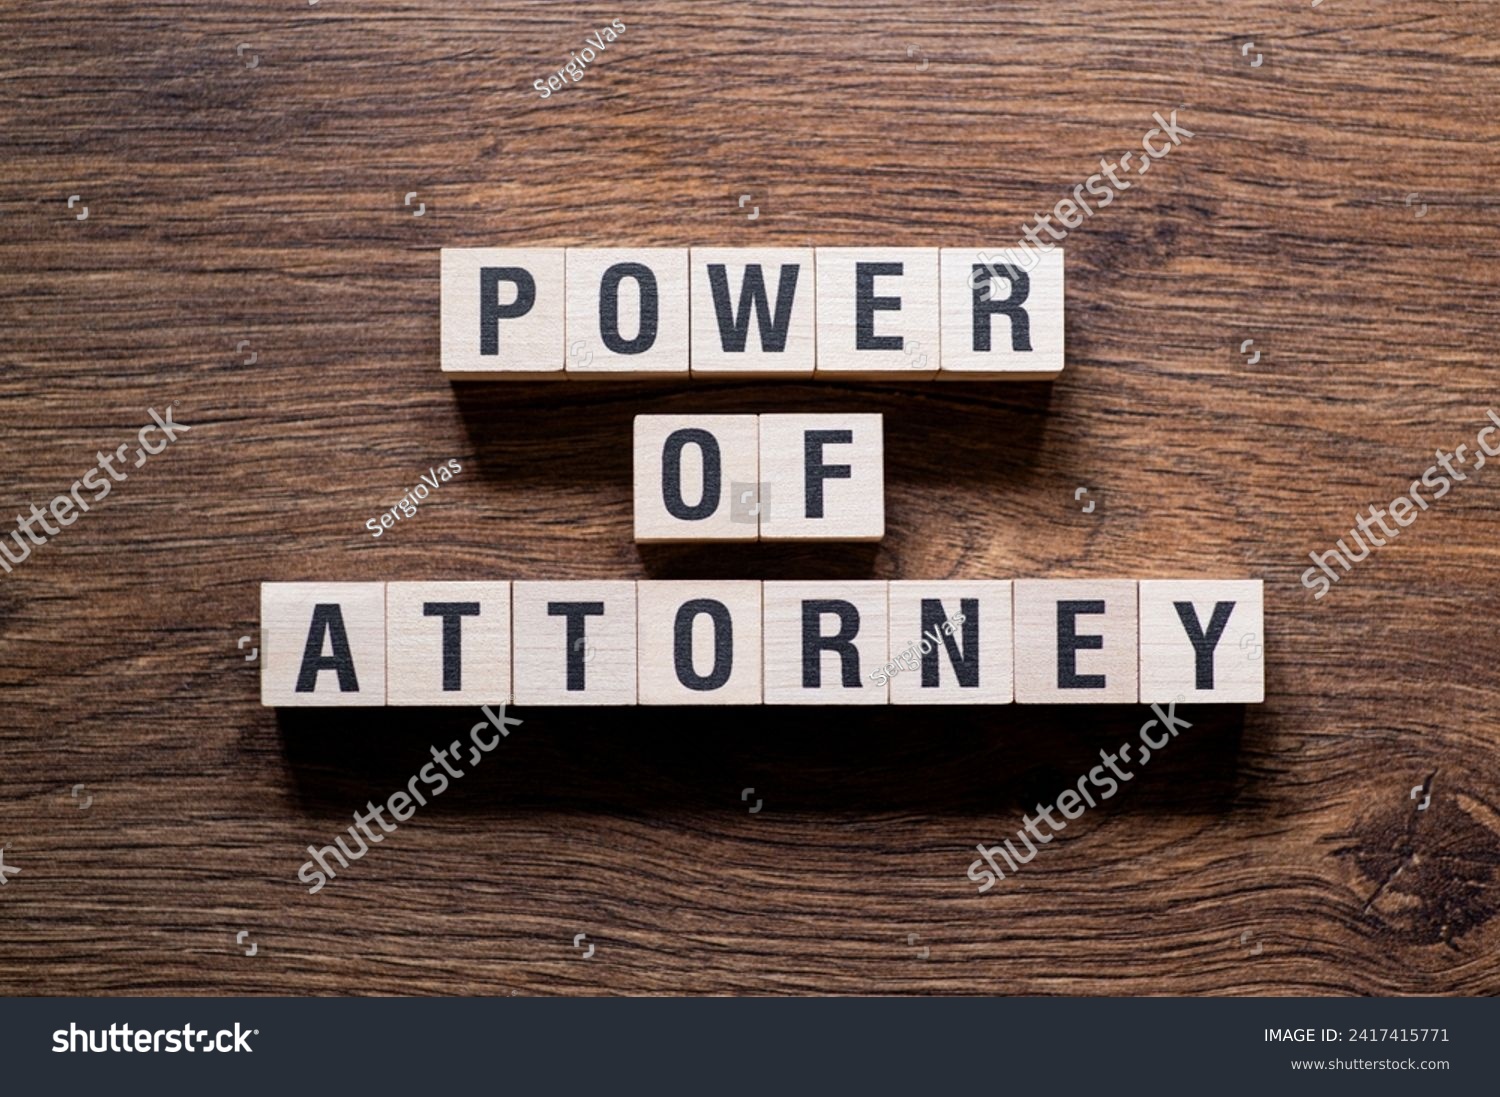 Power of attorney - word concept on building blocks, text #2417415771